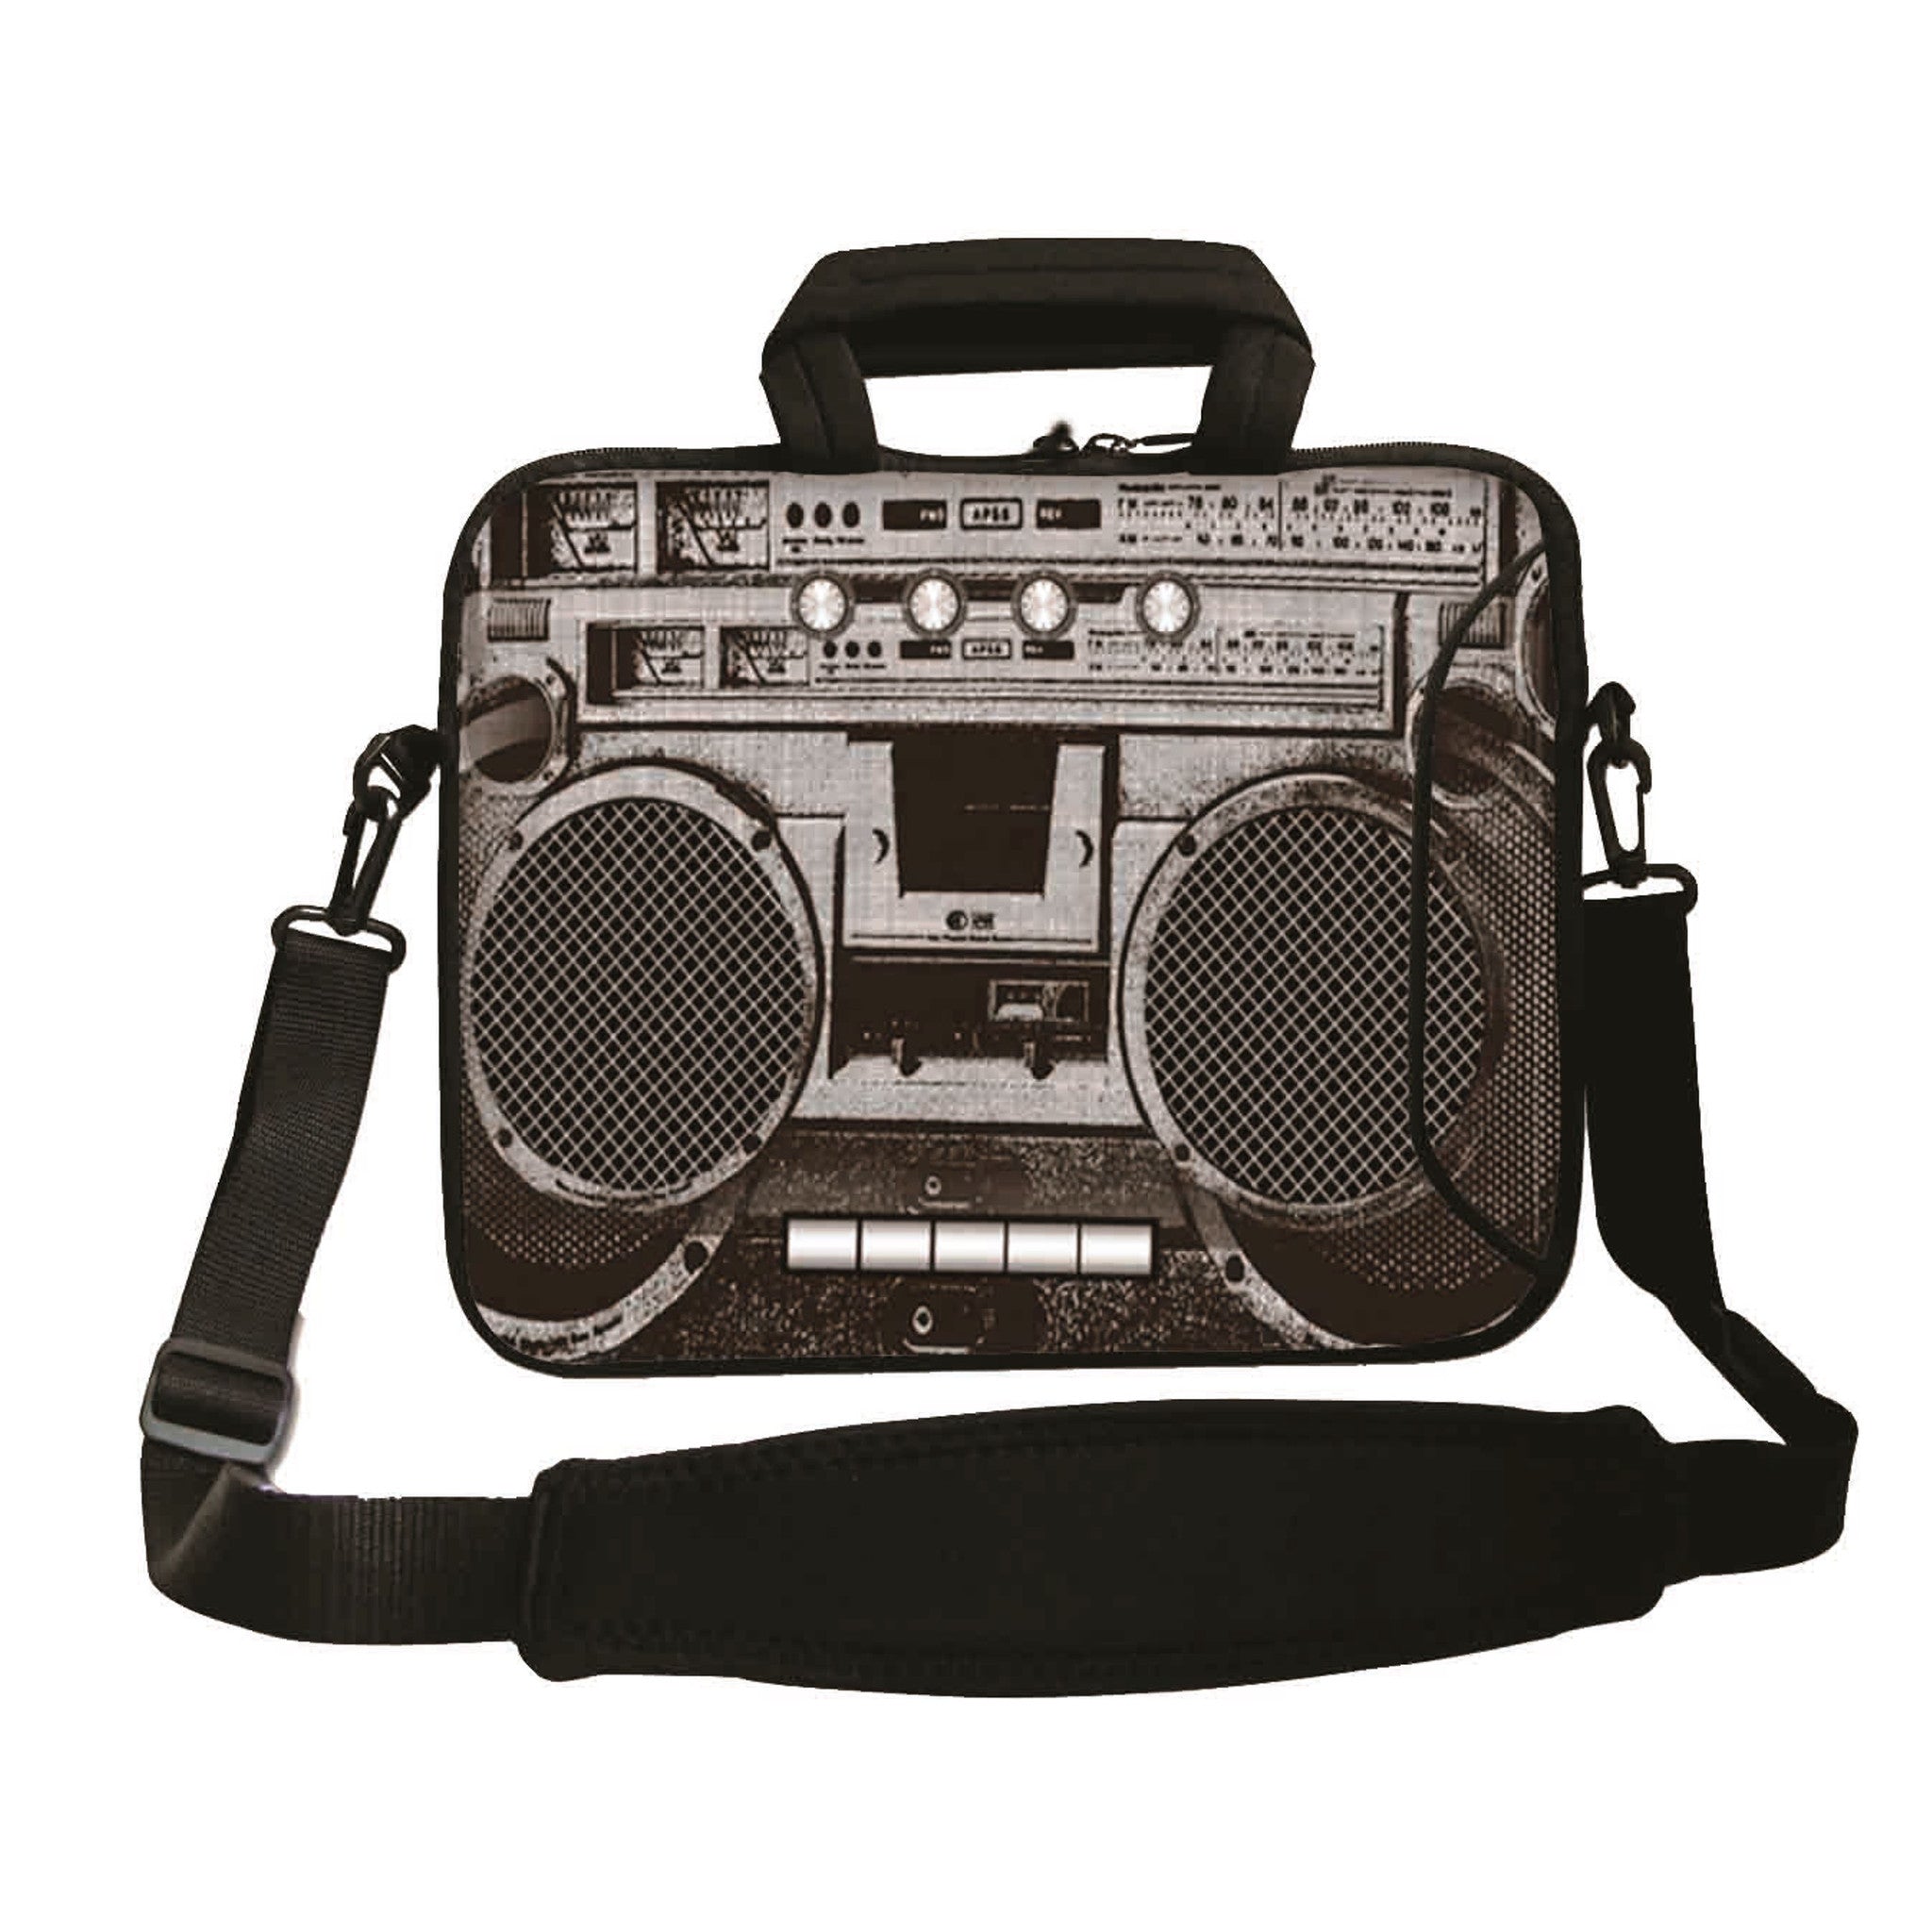 17"- 17.3" (inch) LAPTOP BAG/CASE WITH HANDLE & STRAP, NEOPRENE MADE FOR LAPTOPS/NOTEBOOKS, ZIPPED*BOOMBOX*